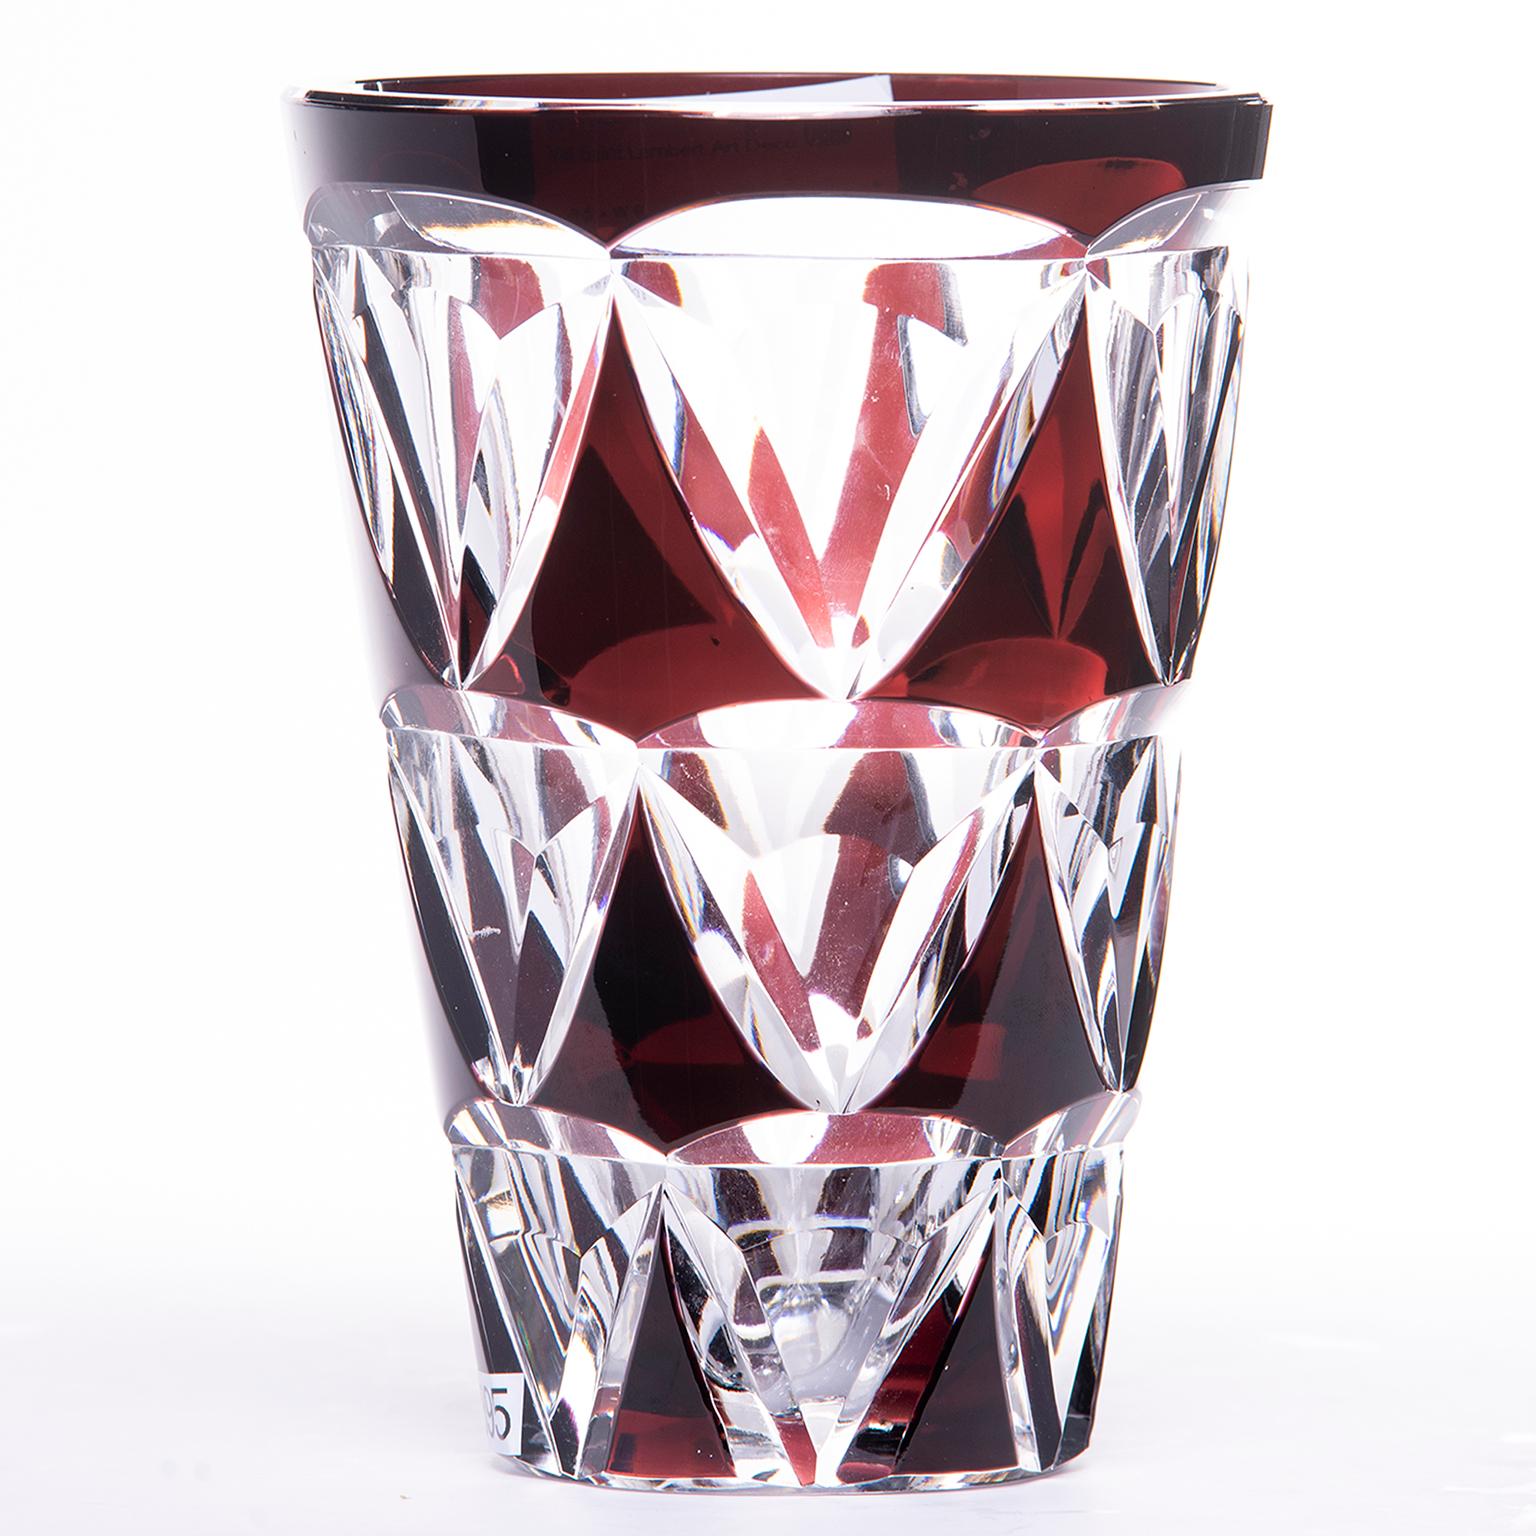 Tall Val St. Lambert vase in heavy clear crystal with deep garnet rim and three rows of faceted graduated size color panels, circa 1930s. Etched Val St. Lambert signature on underside of base. Base diameter is 3.5